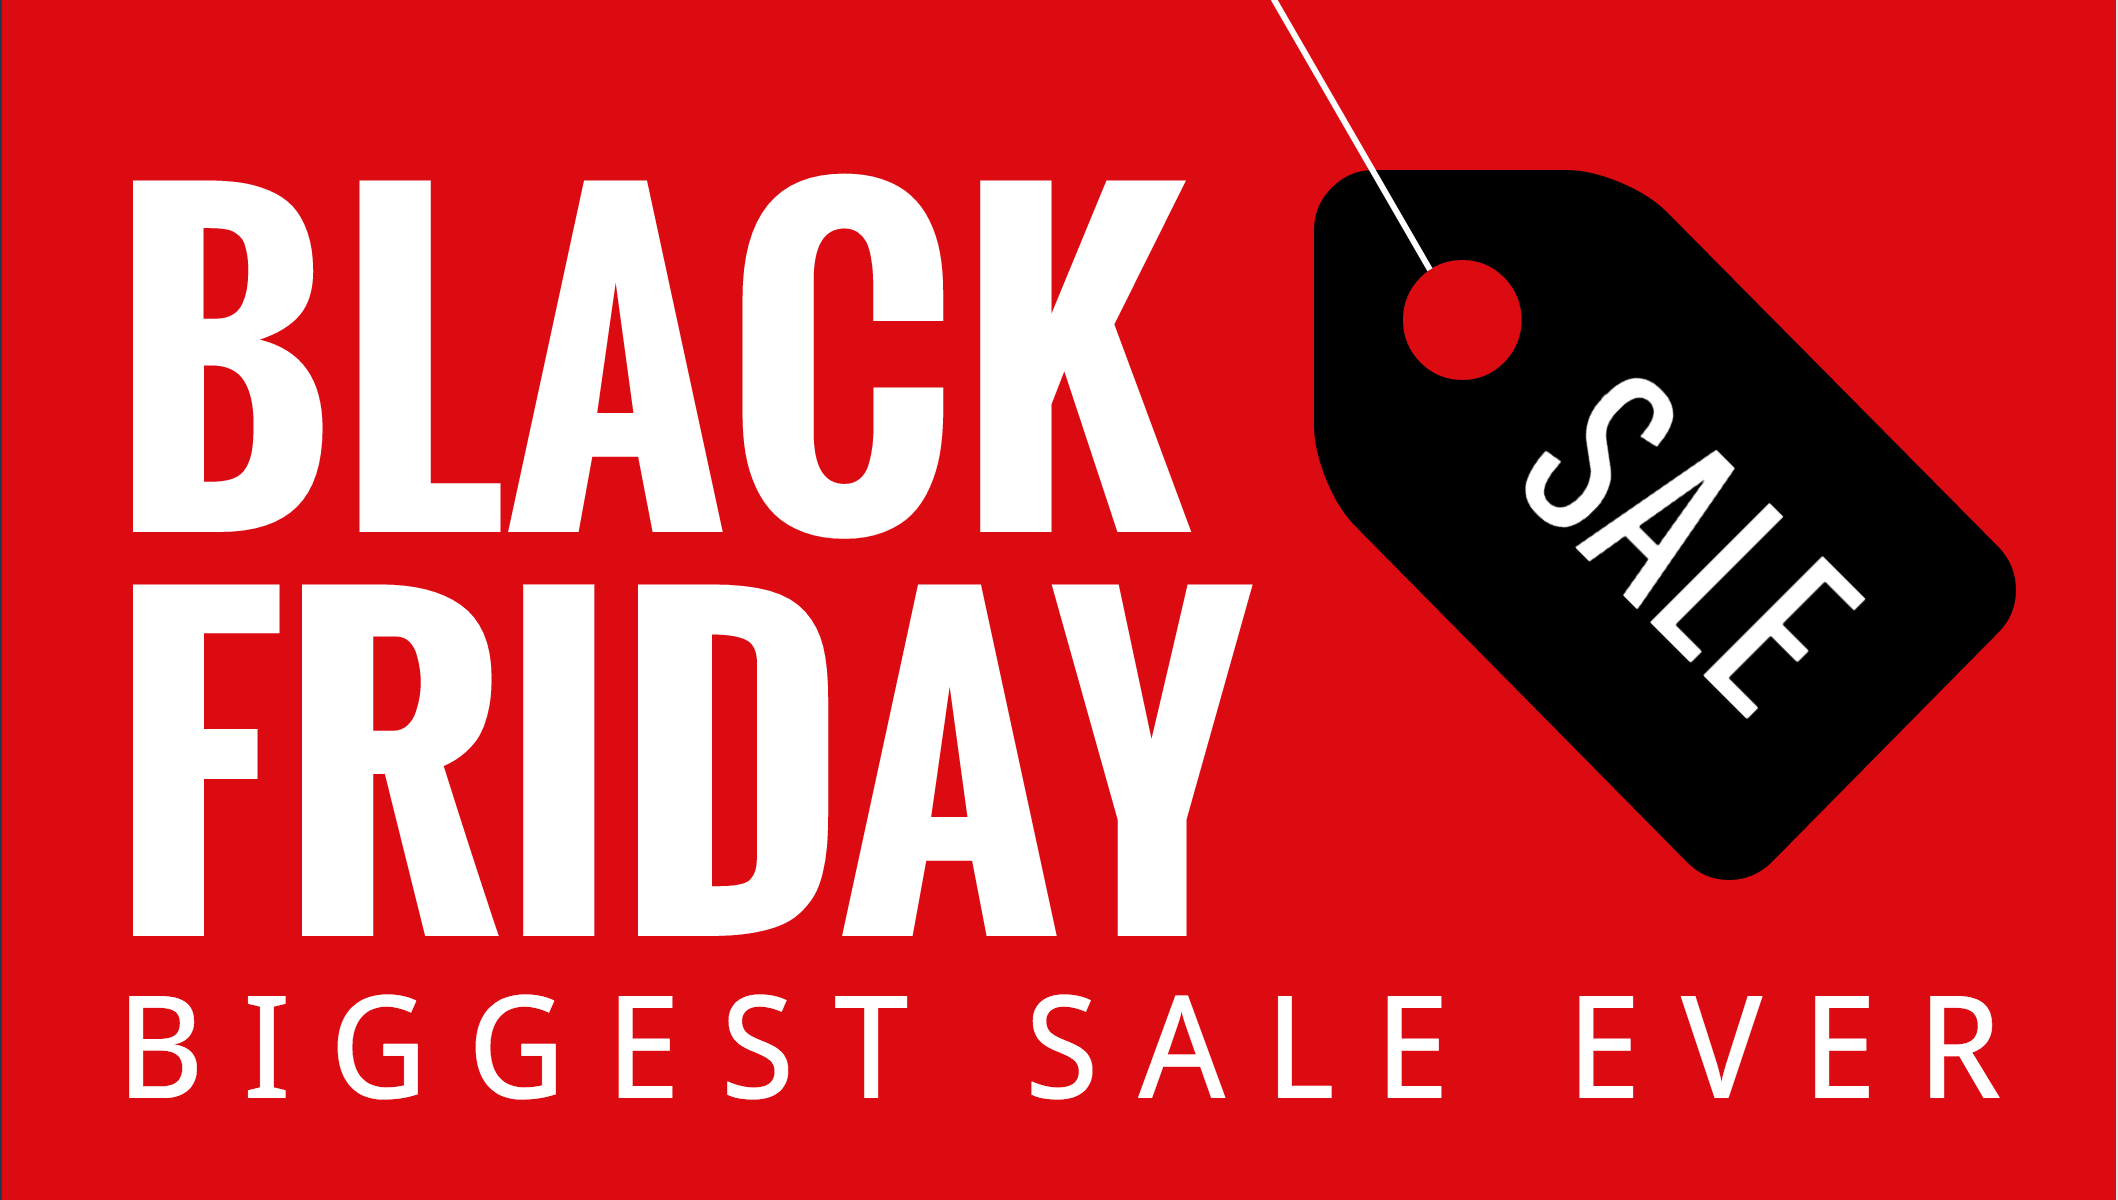 All Black Friday & Cyber Monday 2017 Hot Offers in One